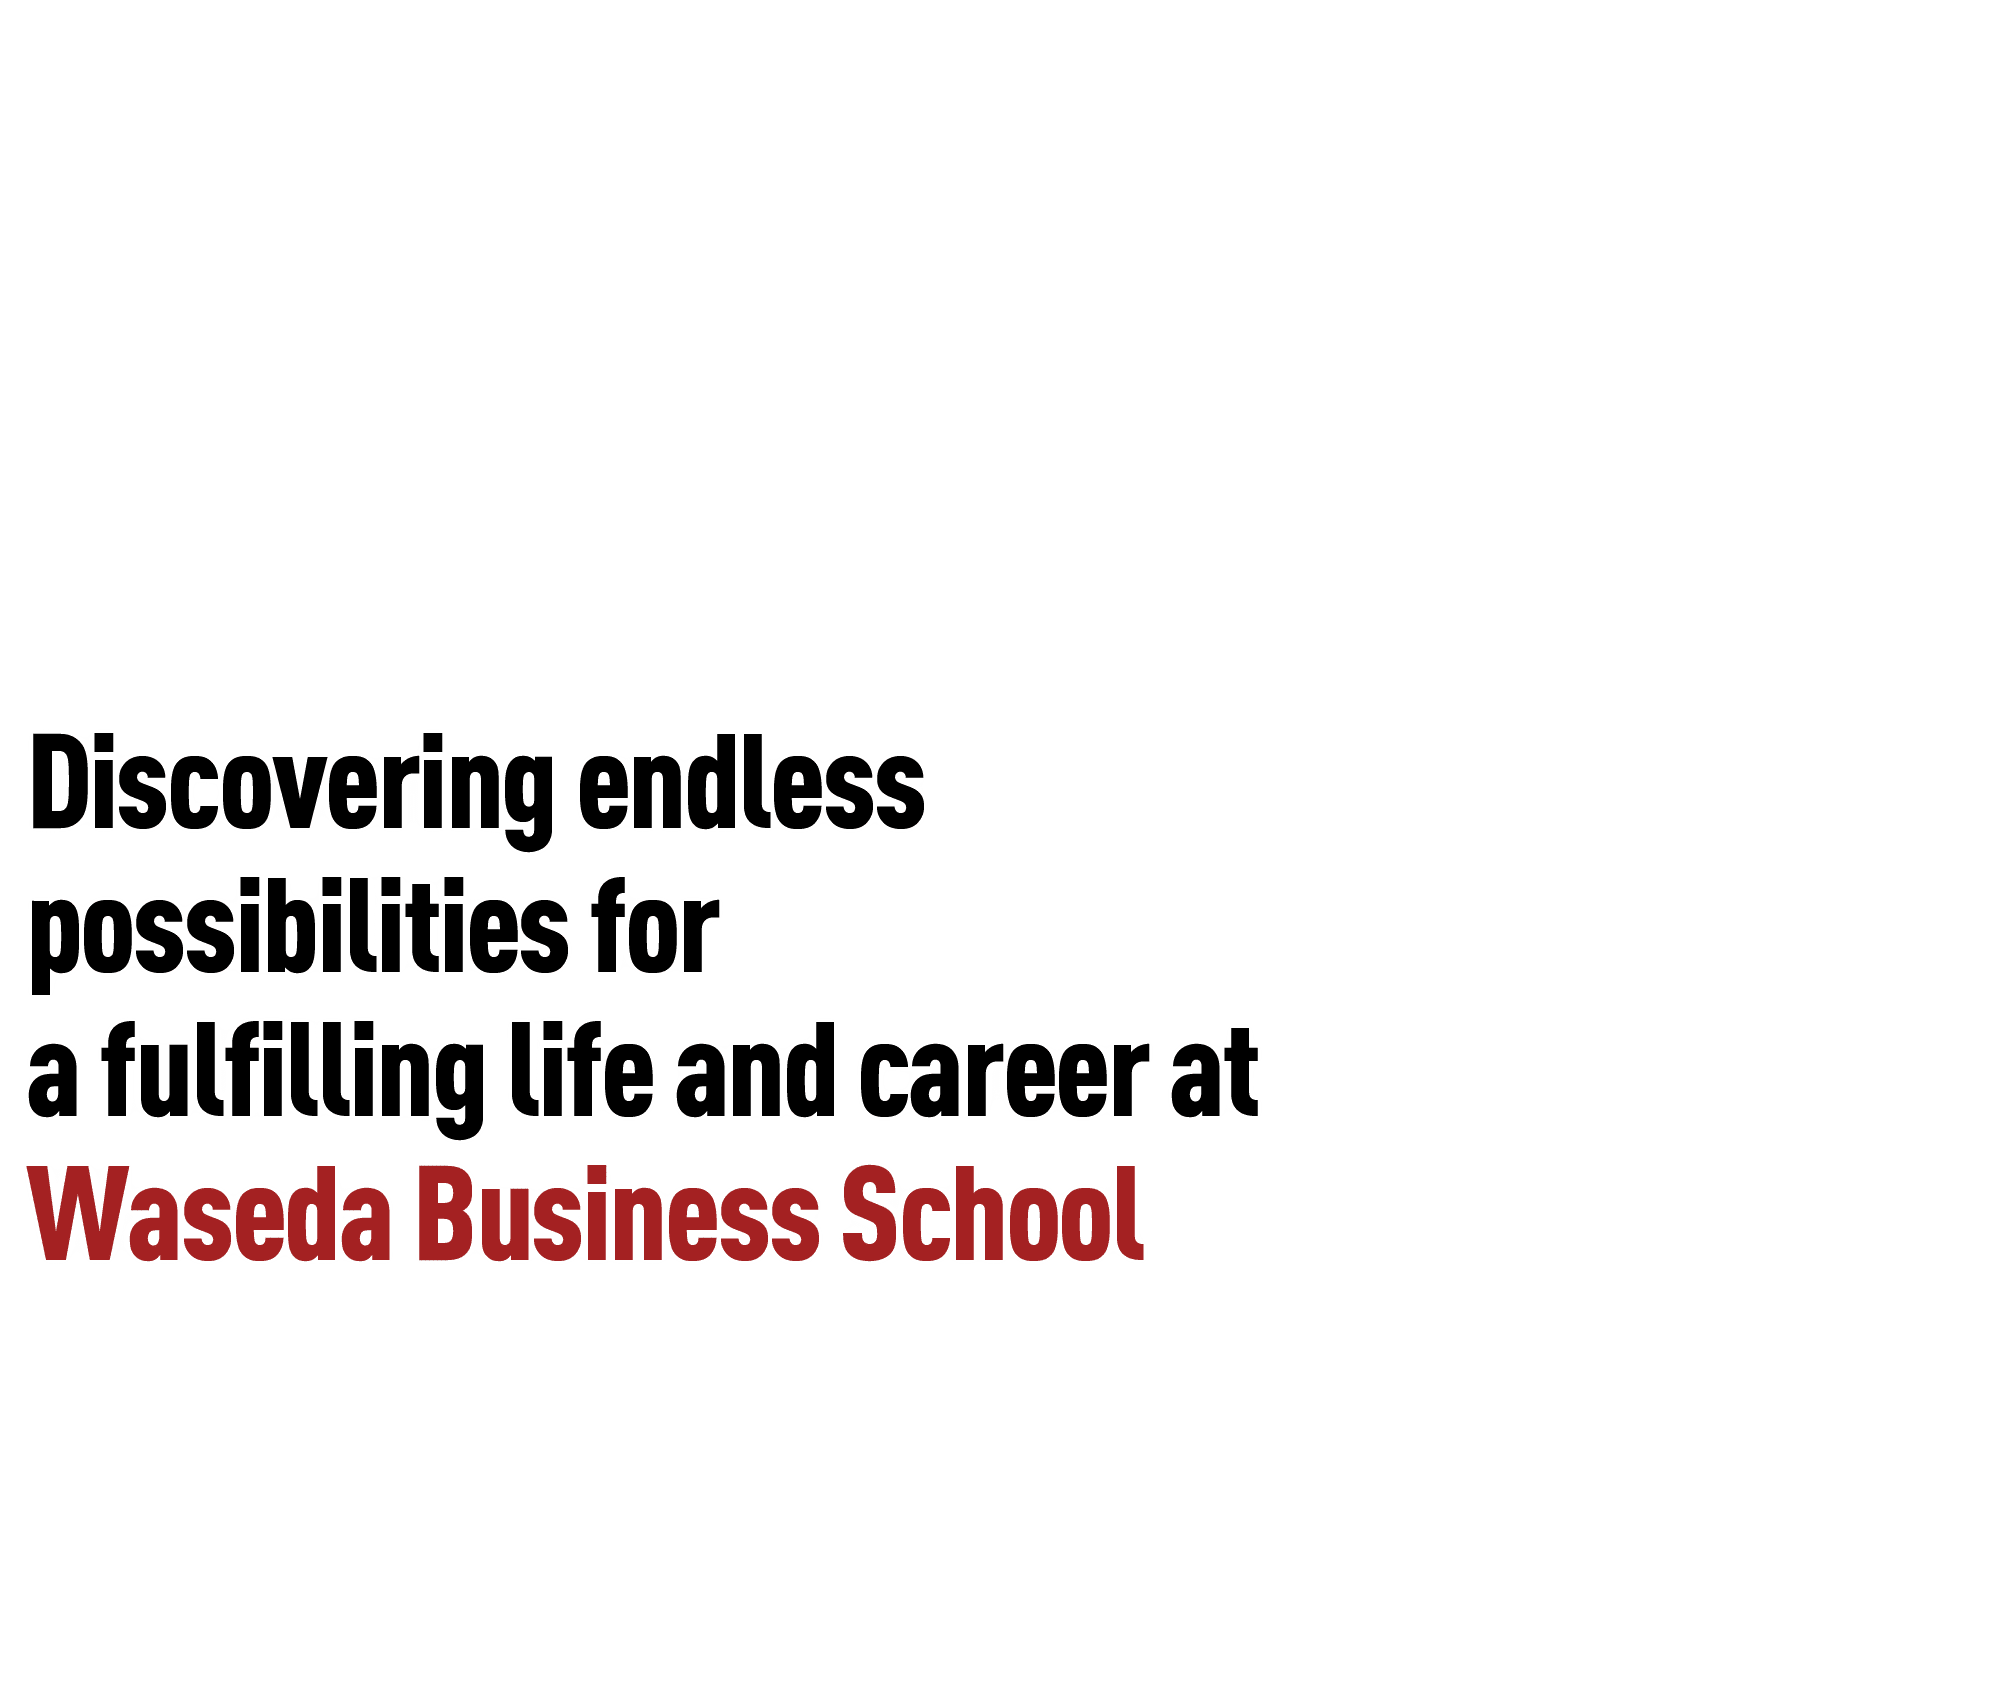 Discovering endless possibilities for a fulfilling life and career at Waseda Business School